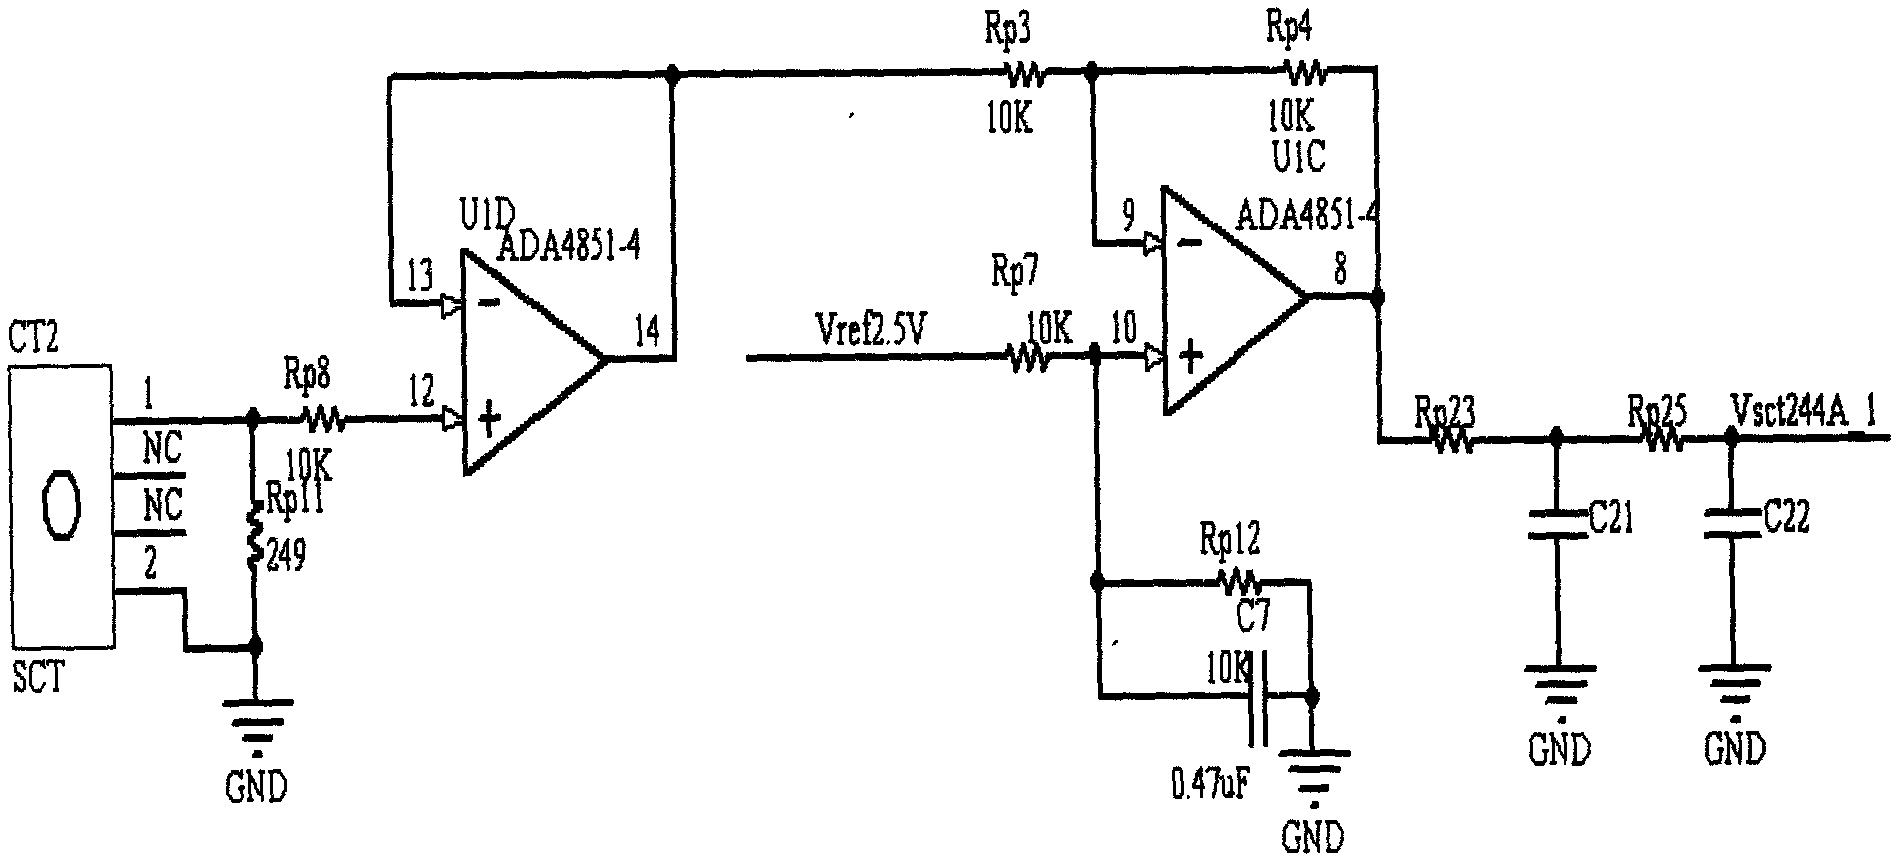 Cable on-line monitoring device for wireless transmission